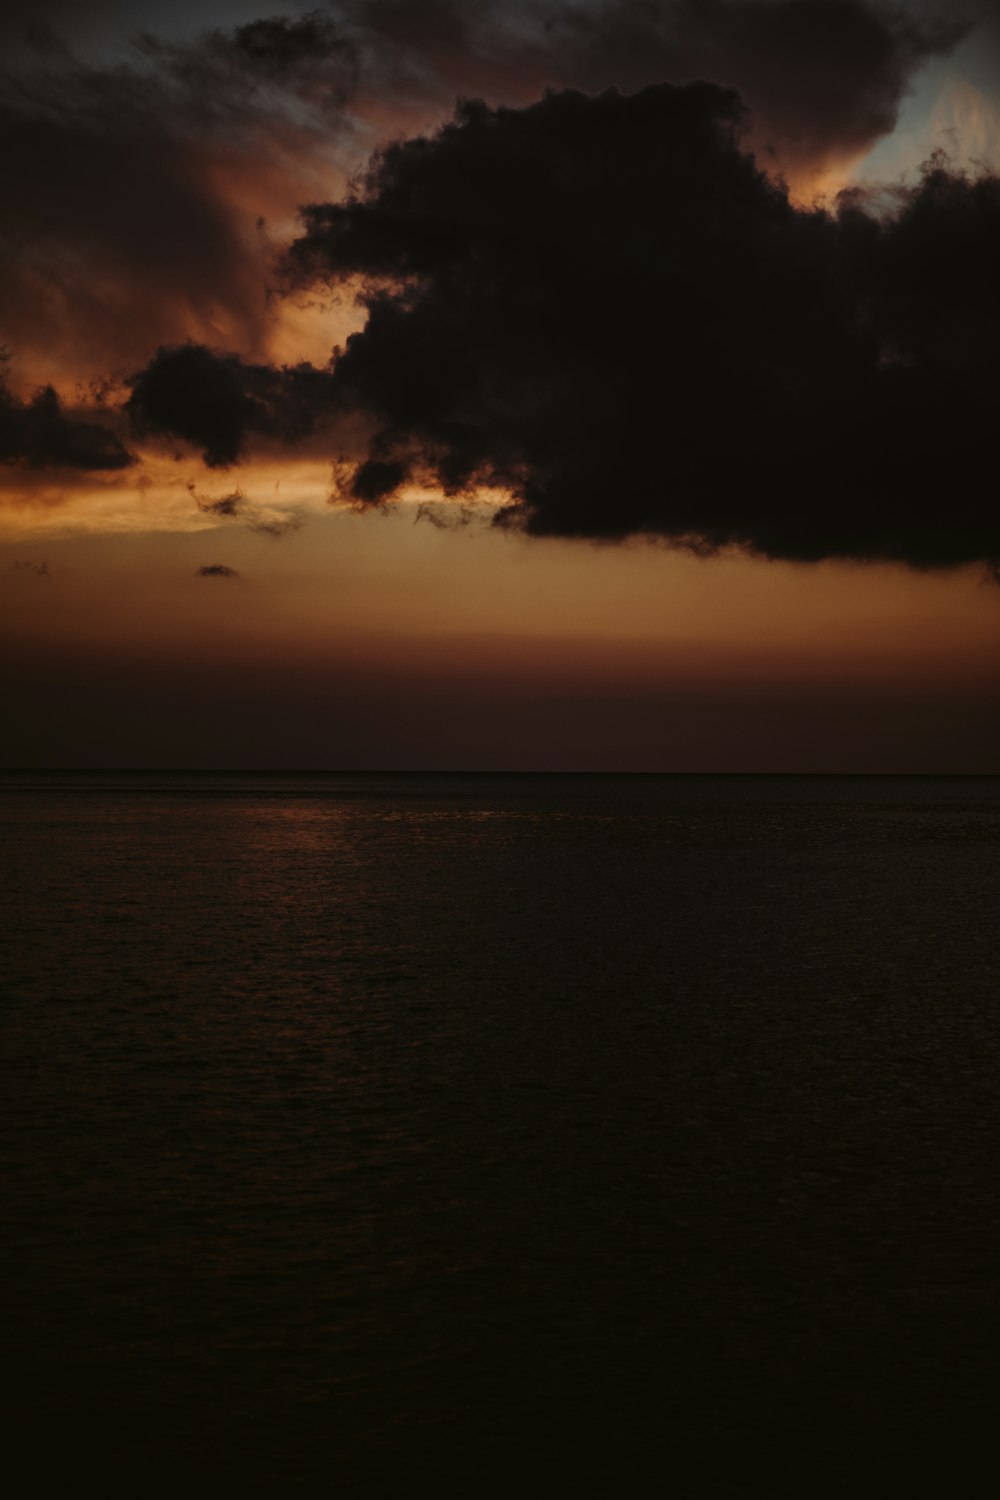 the sun is setting over the ocean with dark clouds